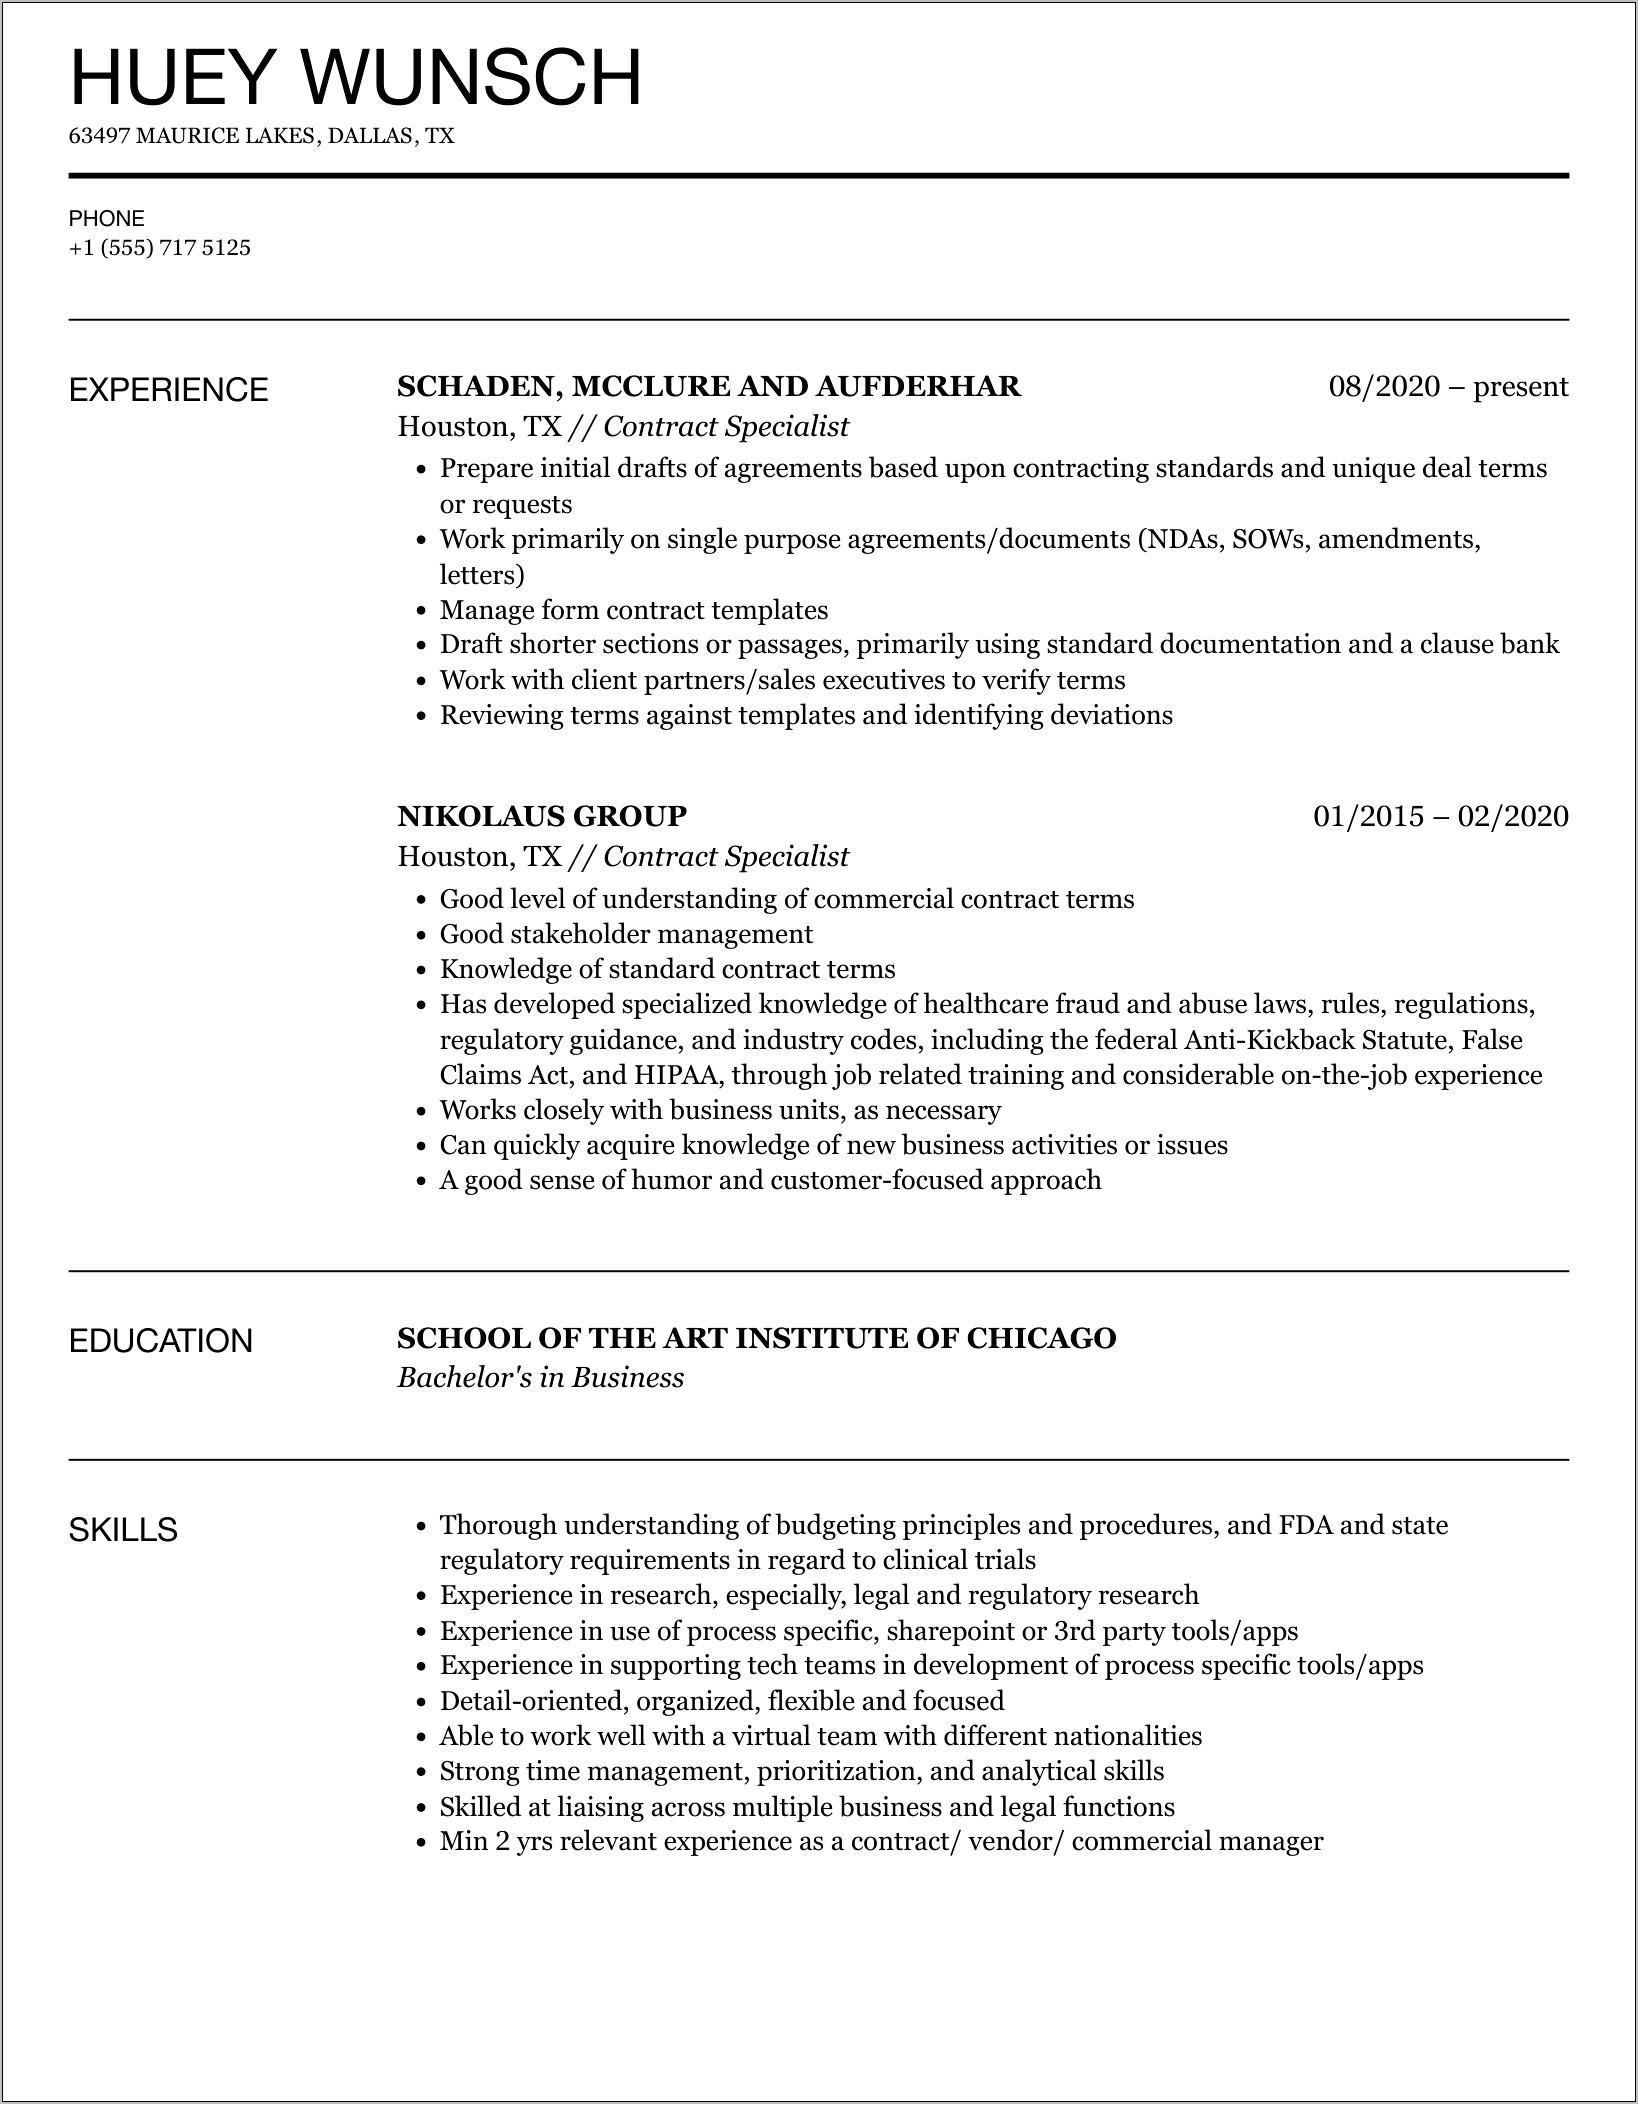 Examples Of Contracts On Resume